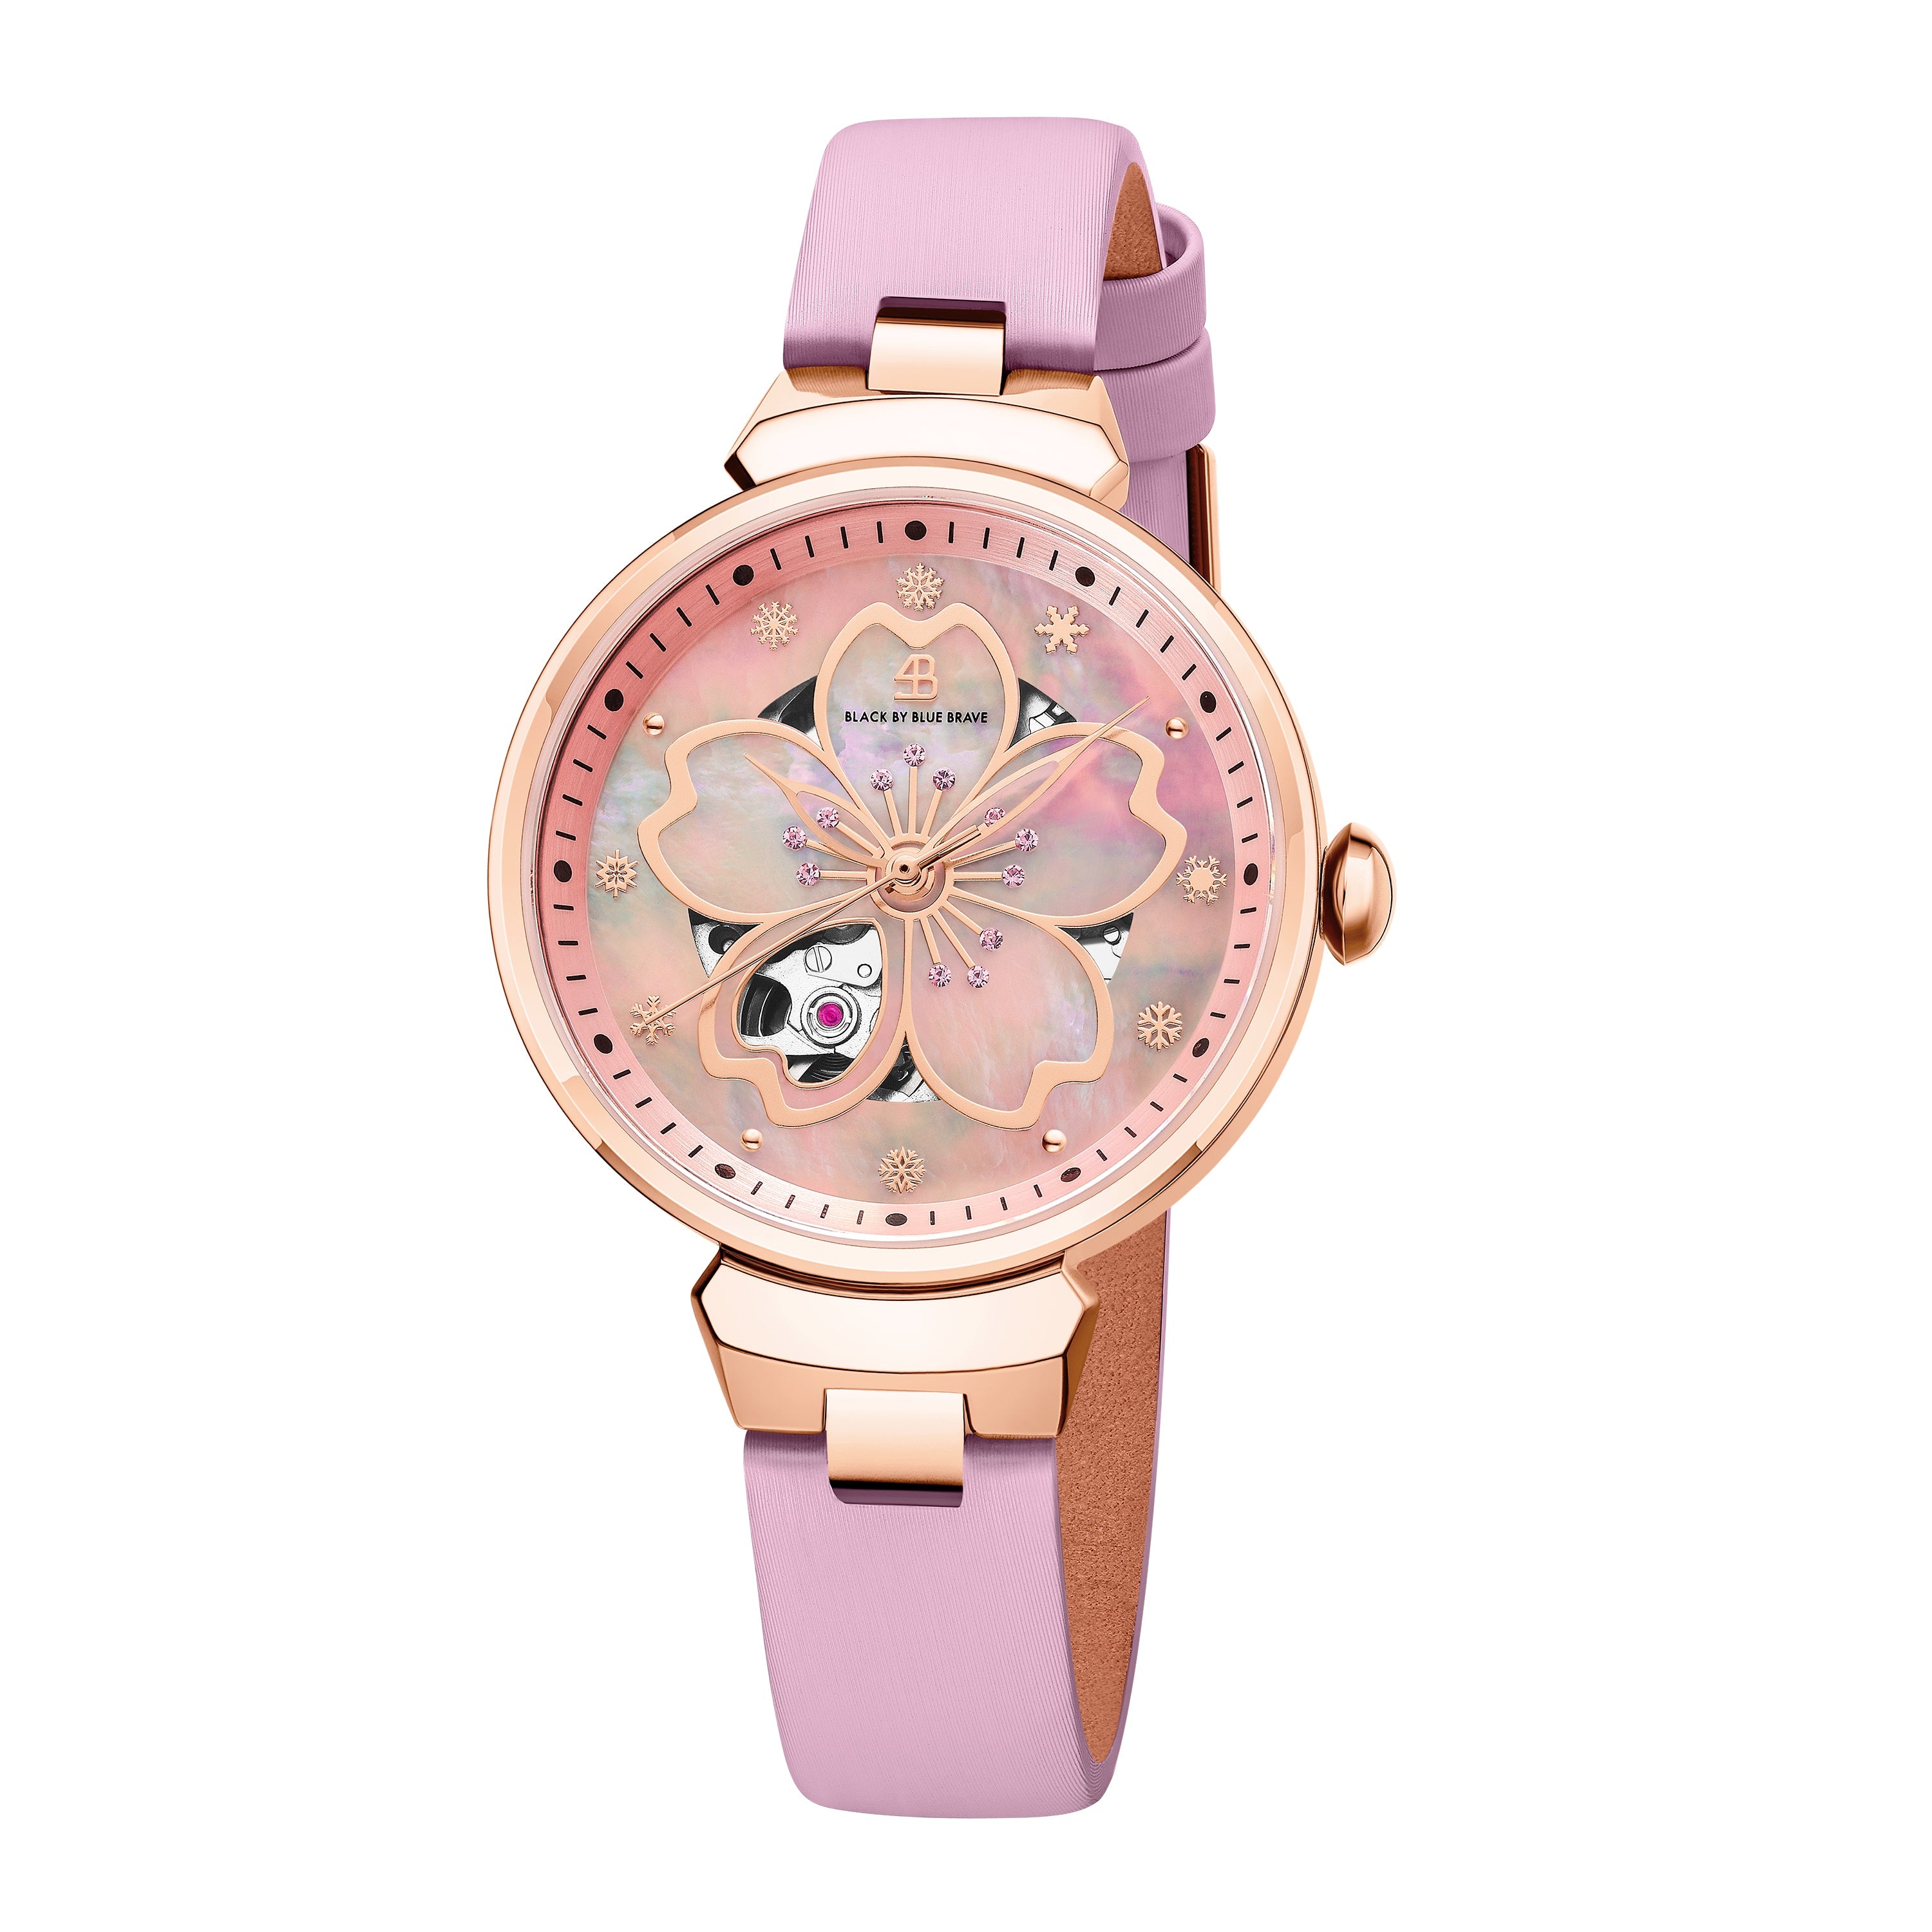 Pink Cherry Blossom 36mm Automatic Watch & Rosegold Bracelet & Pink Ceramic